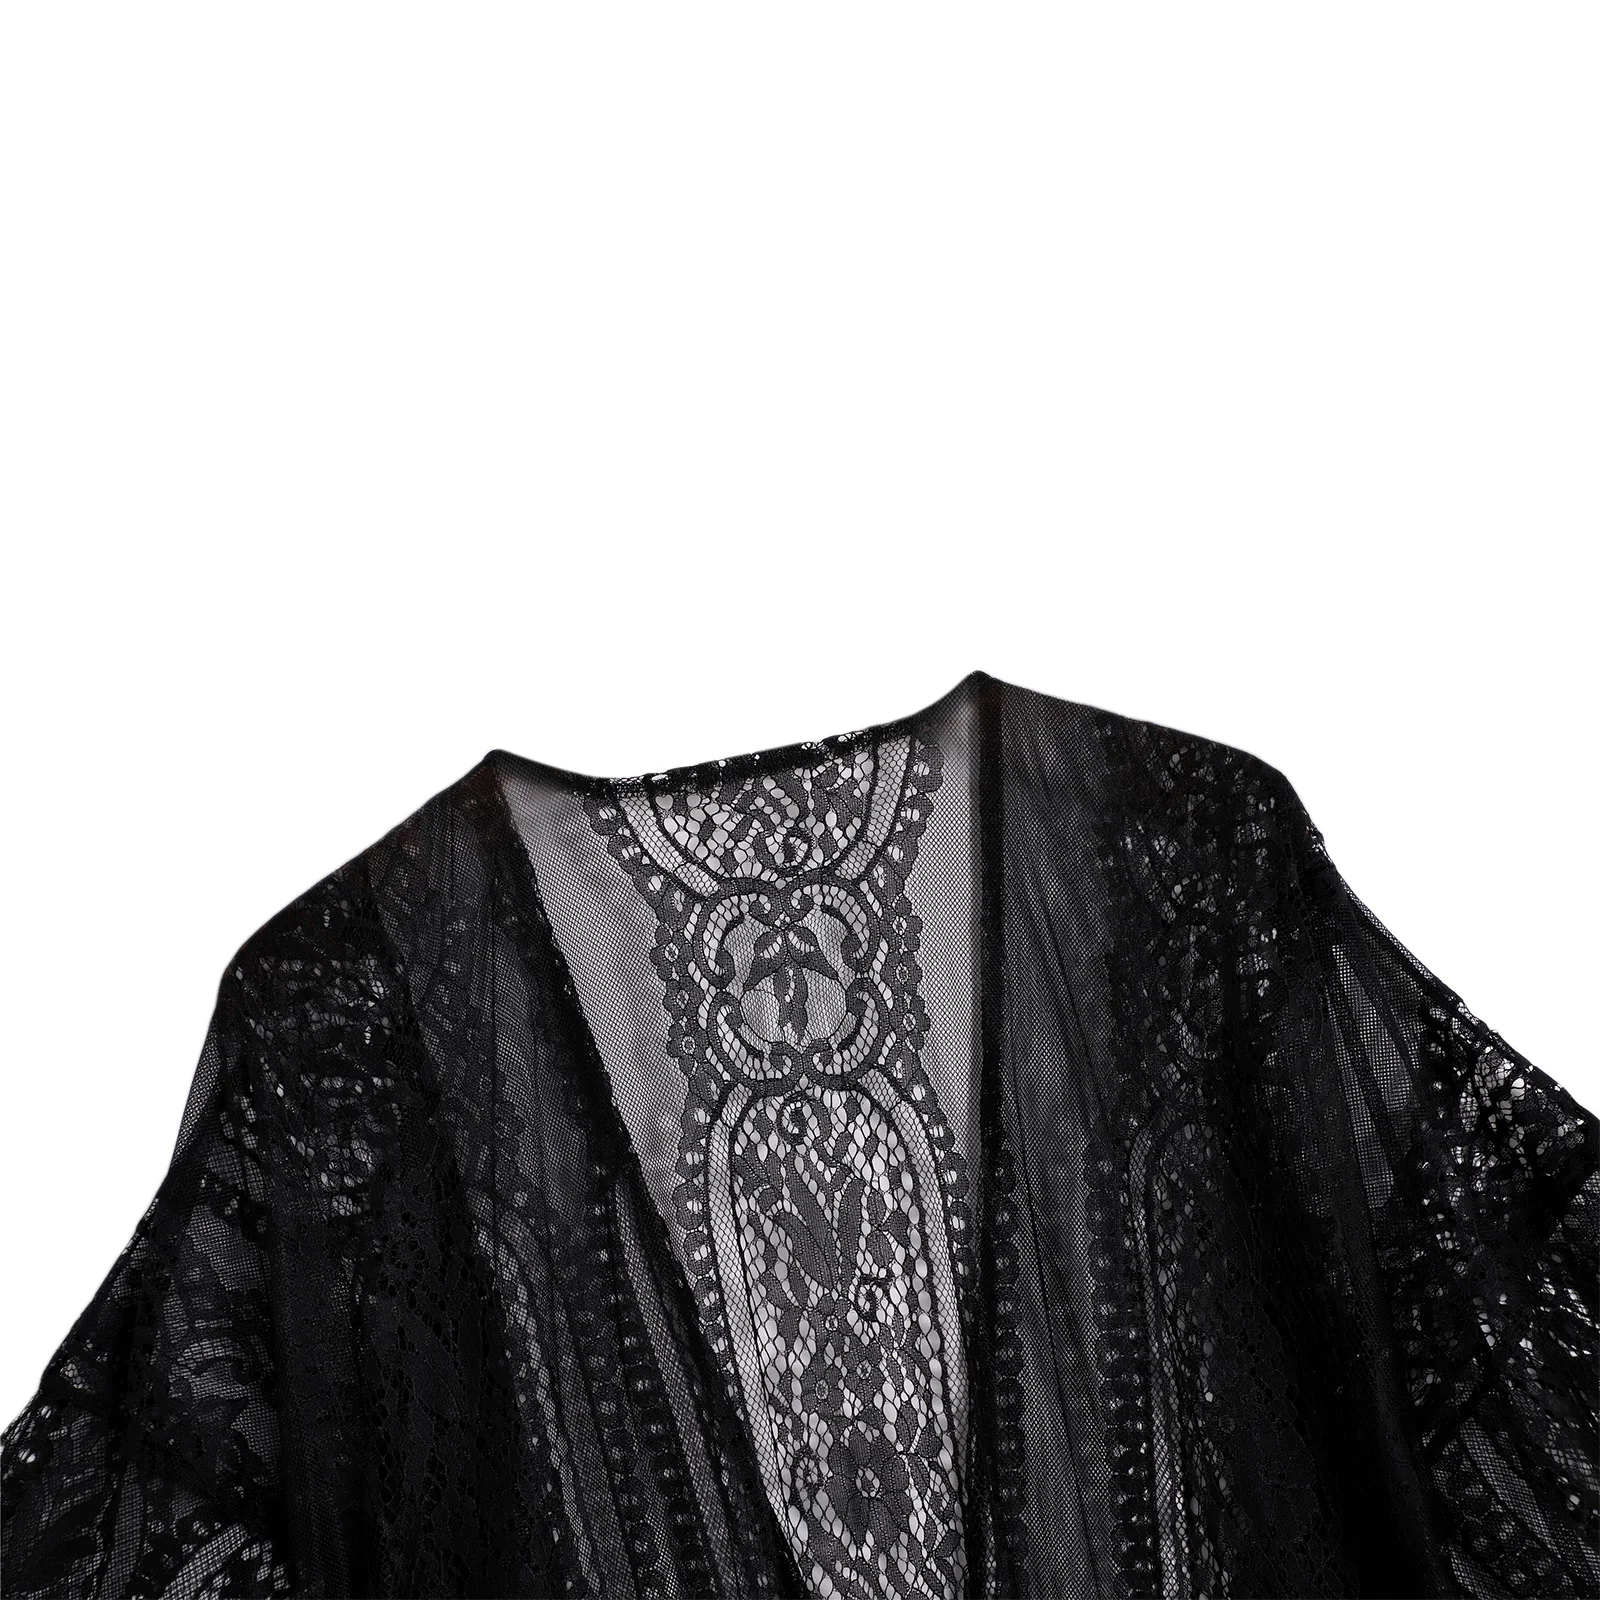 New Women Summer Sun-Proof Cardigan Hollow-Out Lace Long Sleeve Long Style Swimsuit Cover Ups White Black Hot Sale Beachwear bathing suit wrap cover up